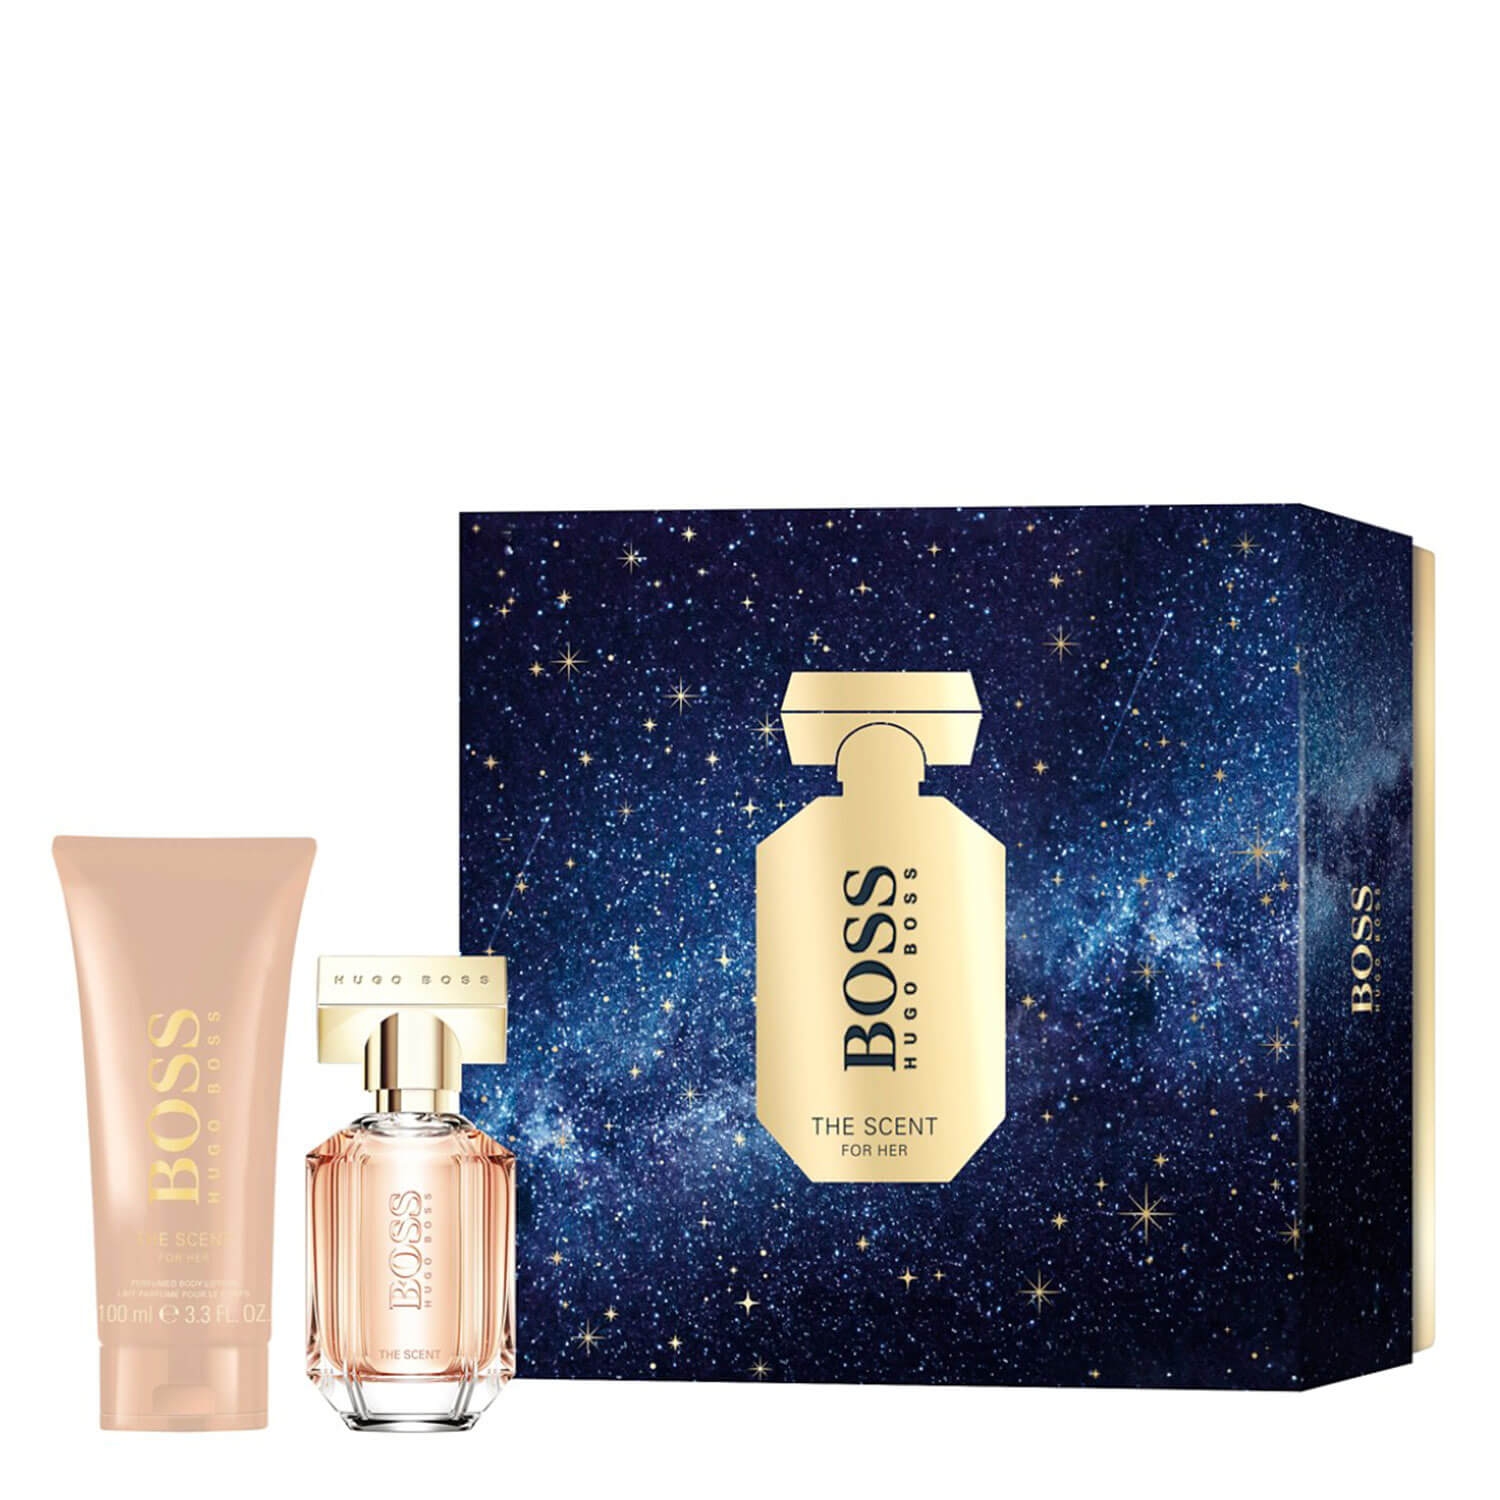 Product image from Boss The Scent - Eau de Parfum Duo for Her